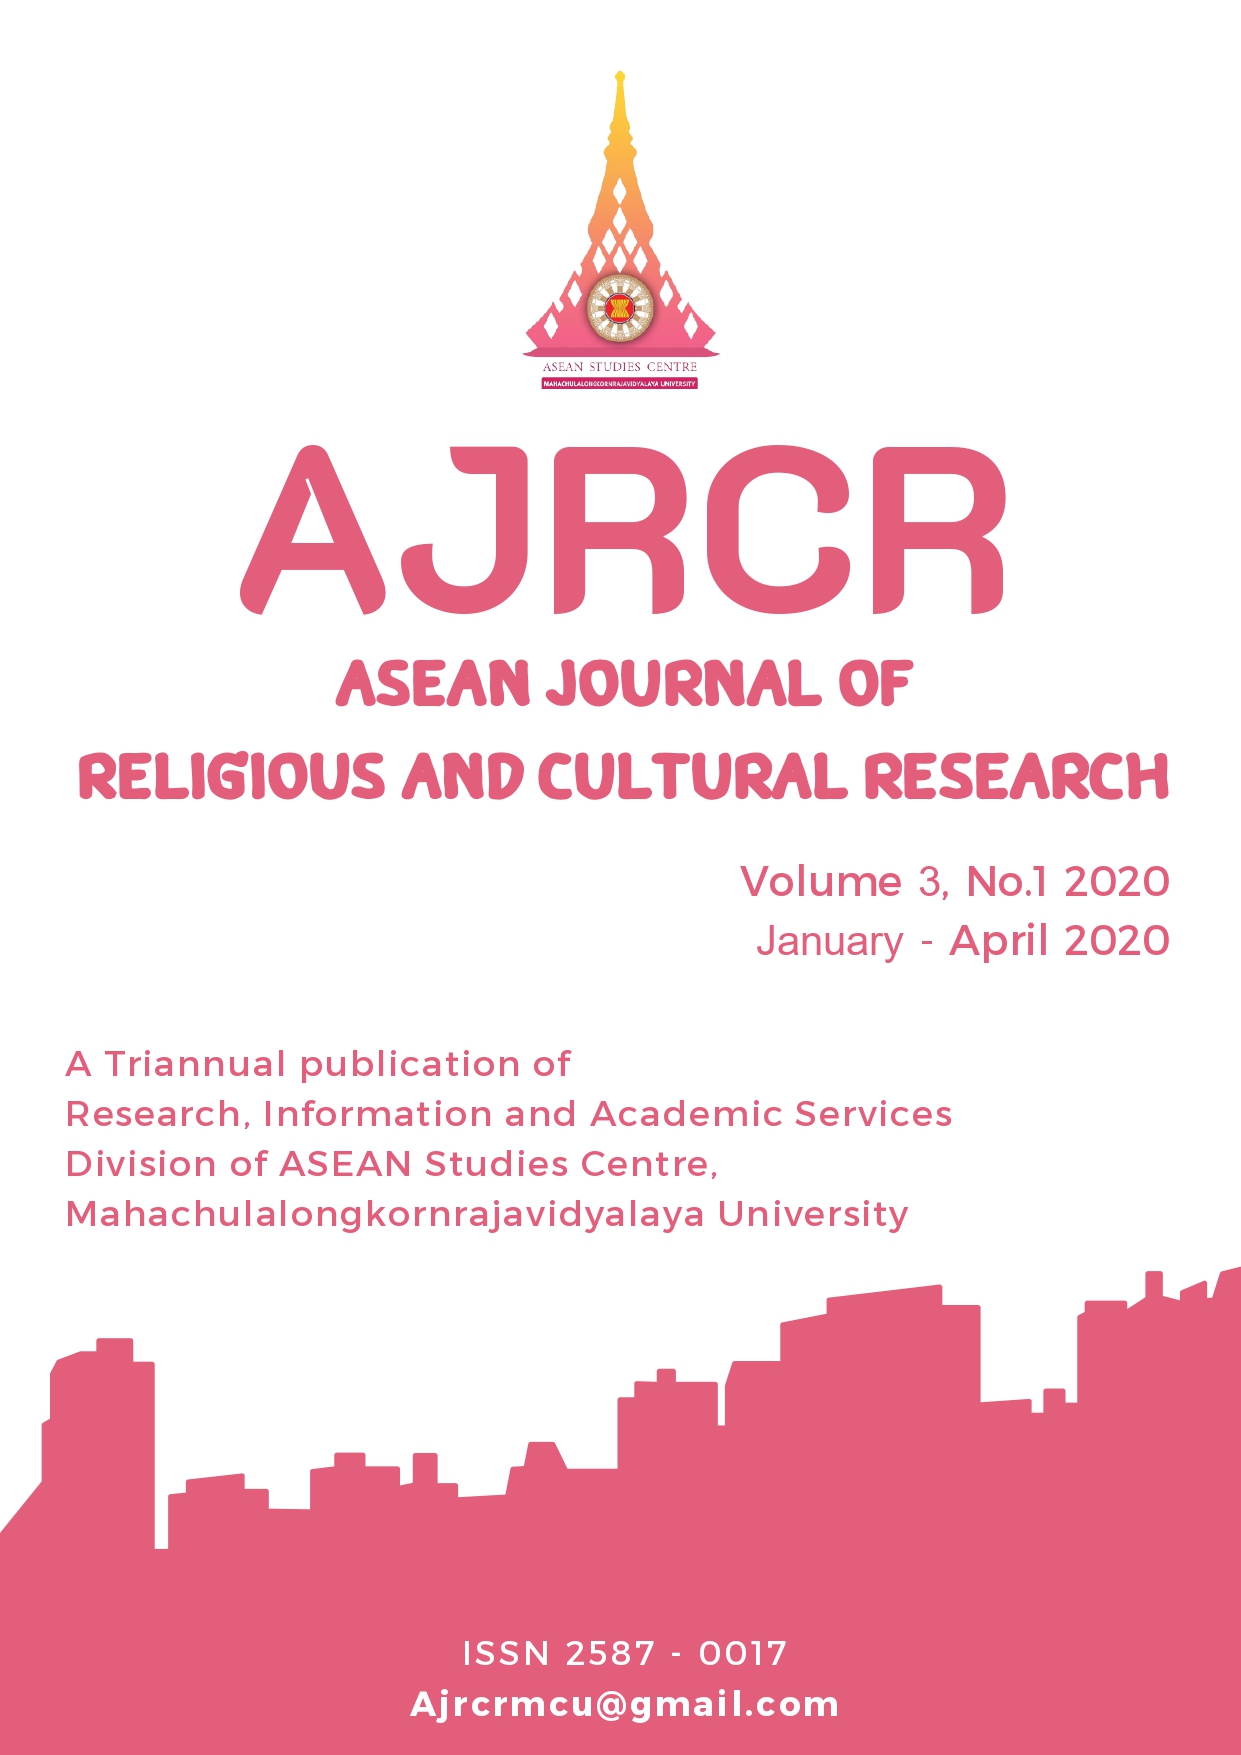 					View Vol. 3 No. 1 (2020): ASEAN Journal of Religious and Cultural Research (AJRCR)
				